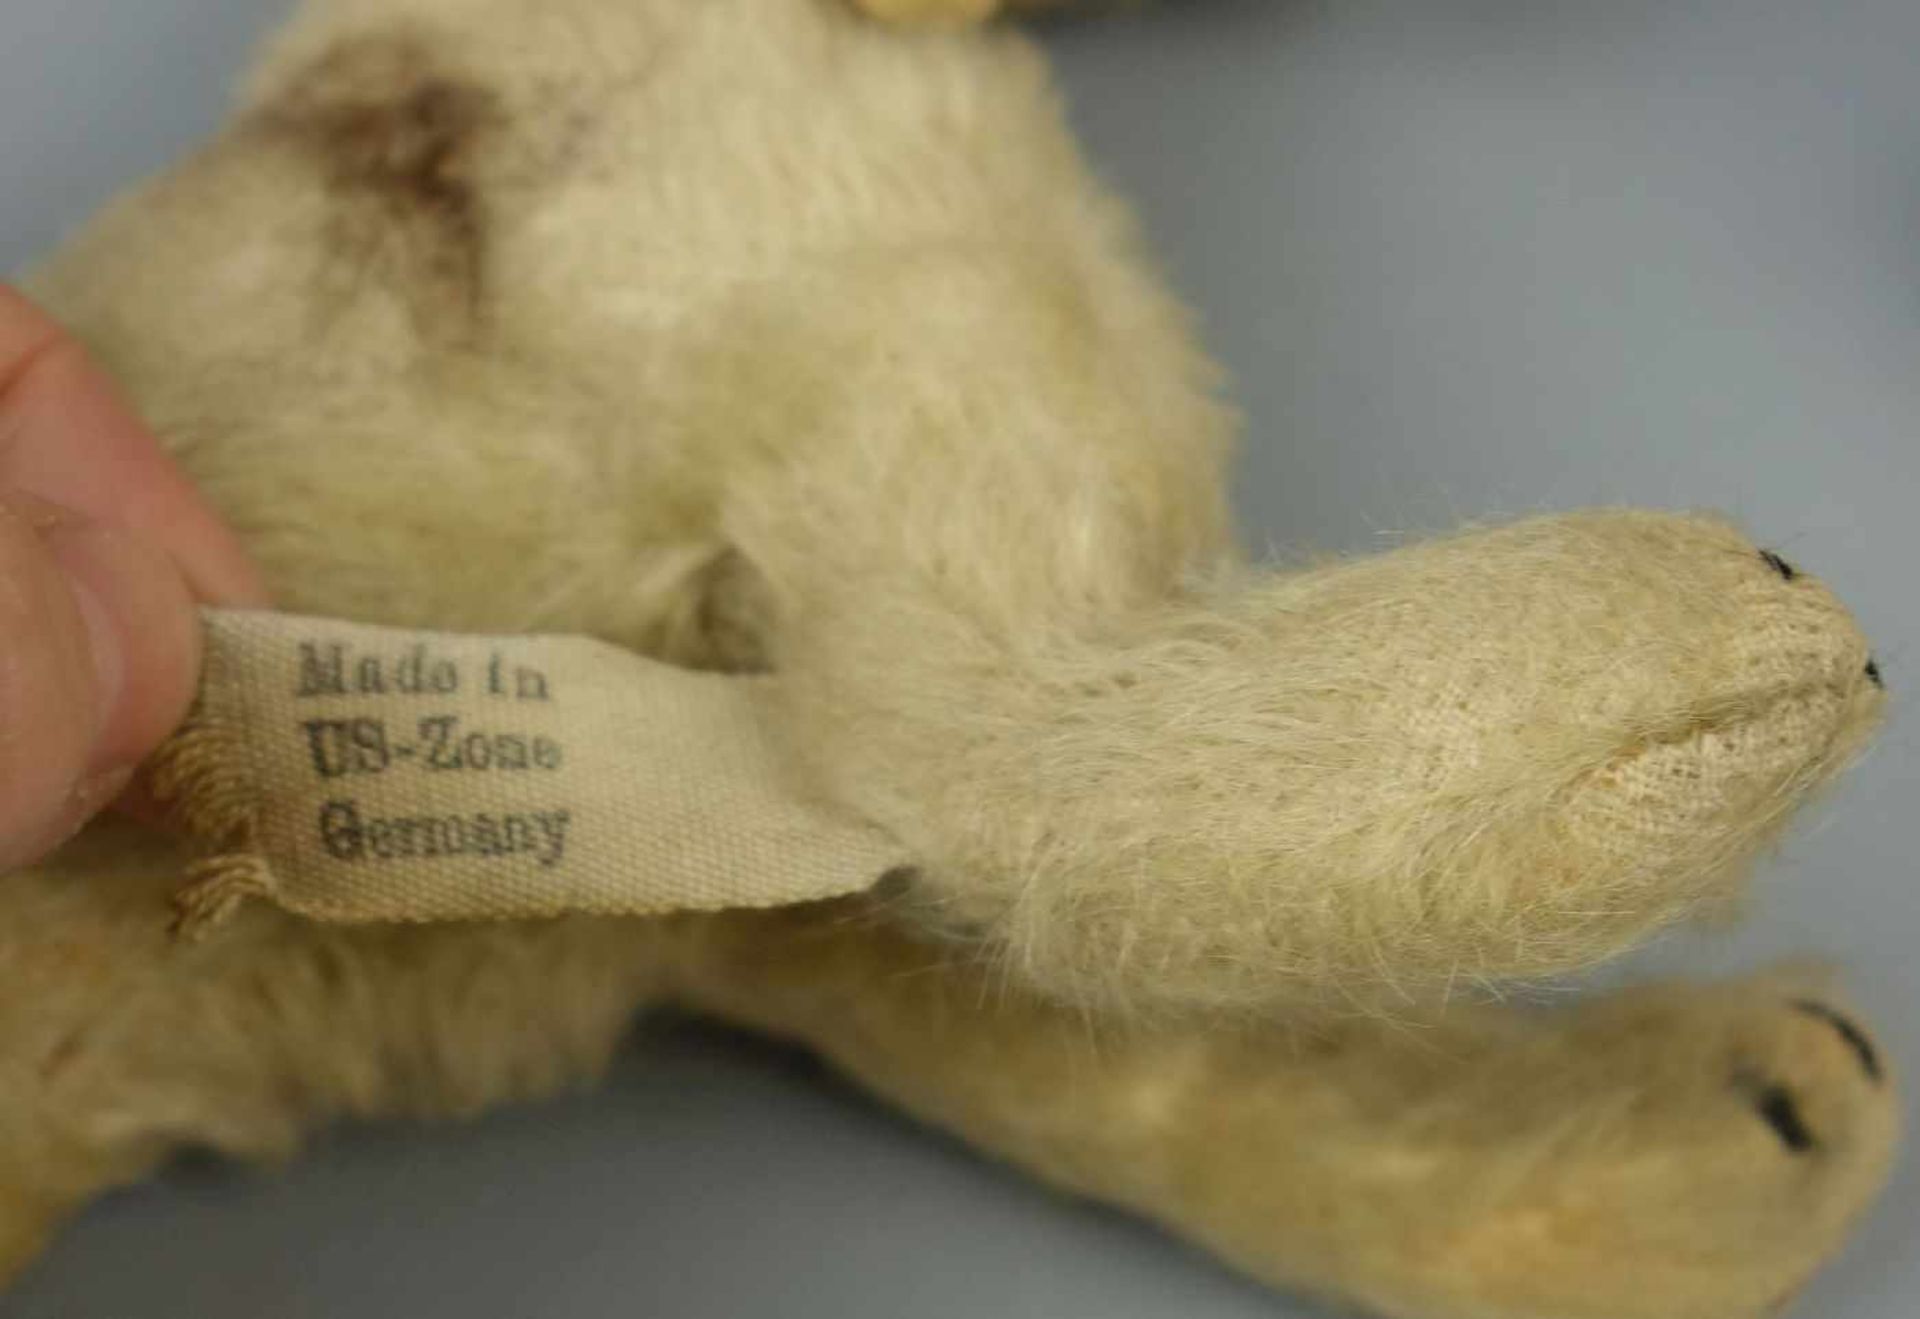 2 PLÜSCHTIERE: TERRIER / HUNDE / two cuddle toy dogs, um 1955. 1) Steiff-Hund "Foxy", Mohair, an - Image 7 of 7